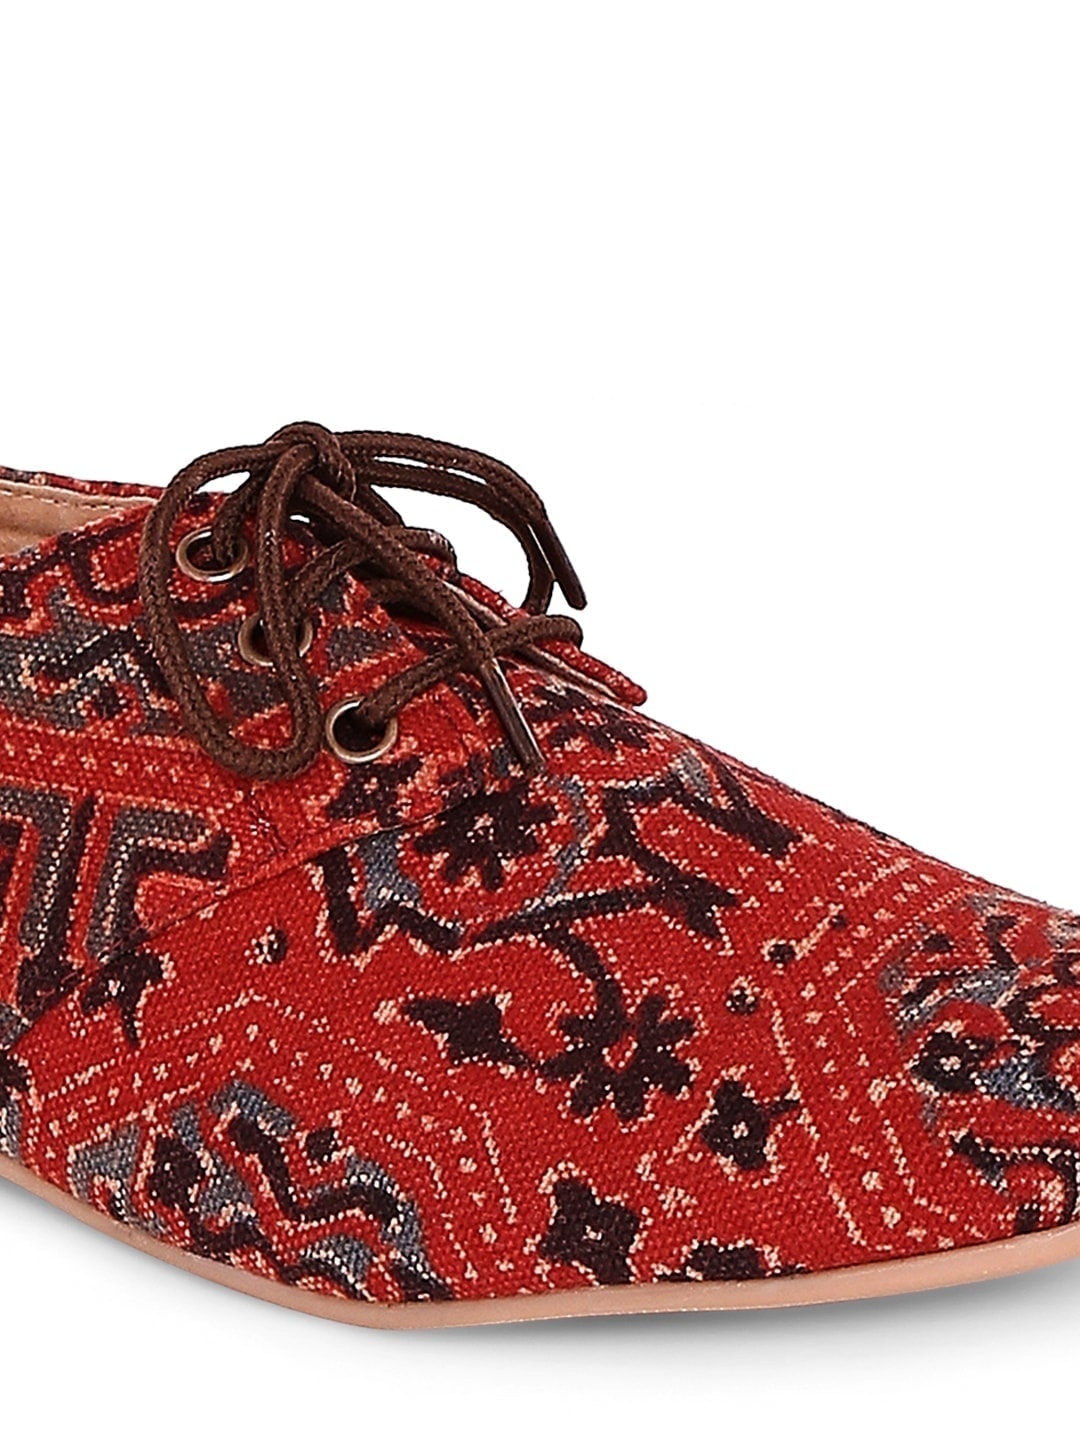 Red Mud Ajrakh Print Oxford Shoes